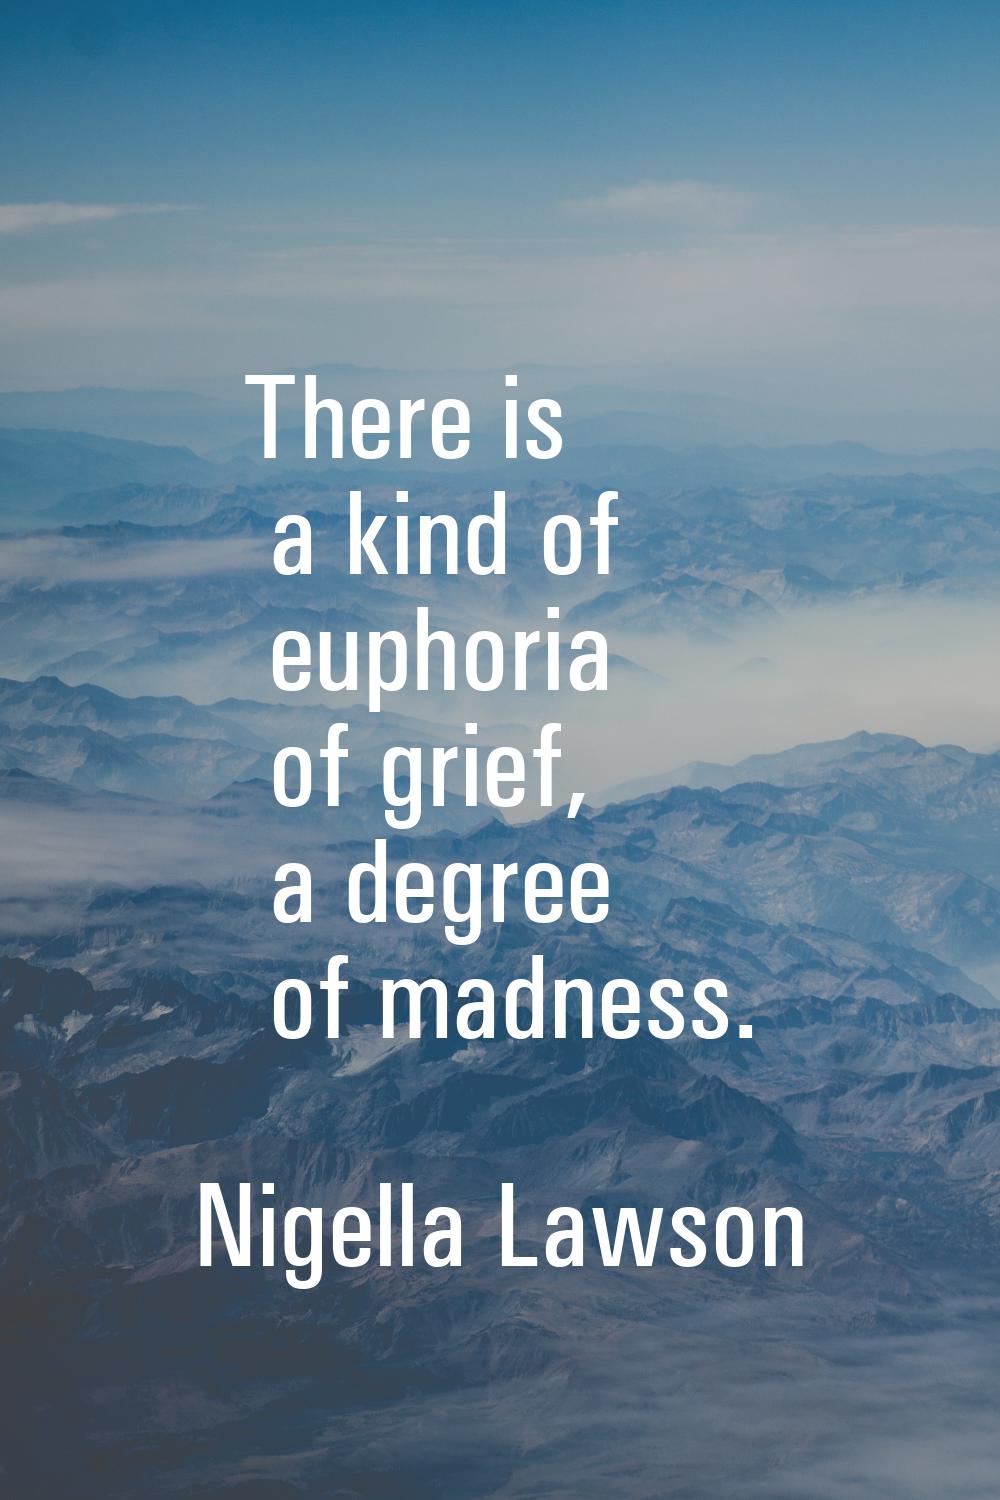 There is a kind of euphoria of grief, a degree of madness.